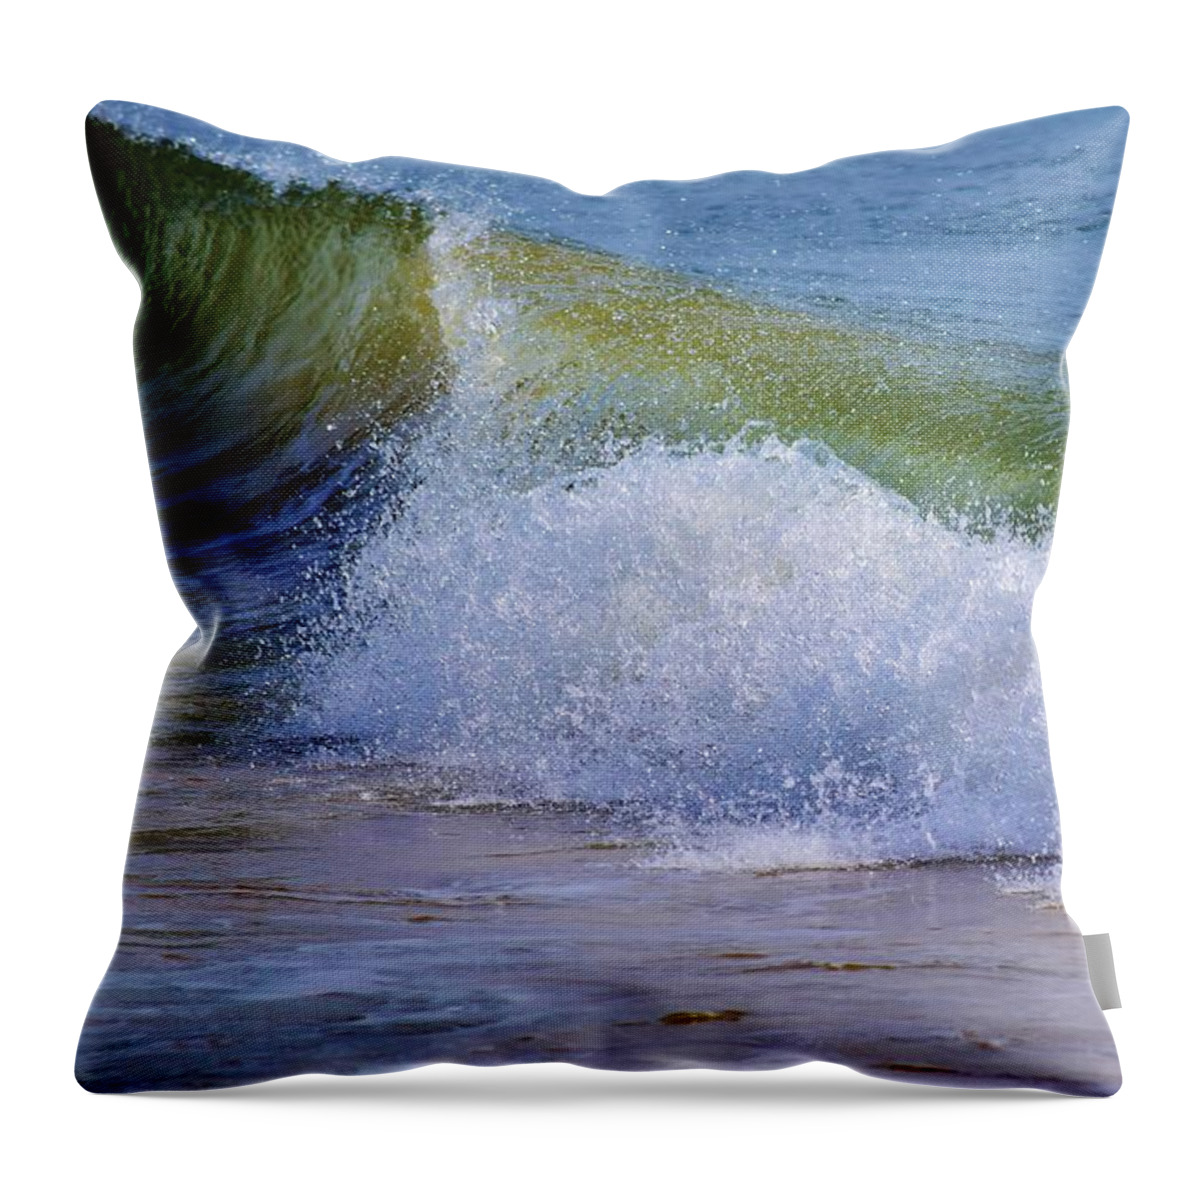 Waves Throw Pillow featuring the photograph Crash by Nicole Lloyd